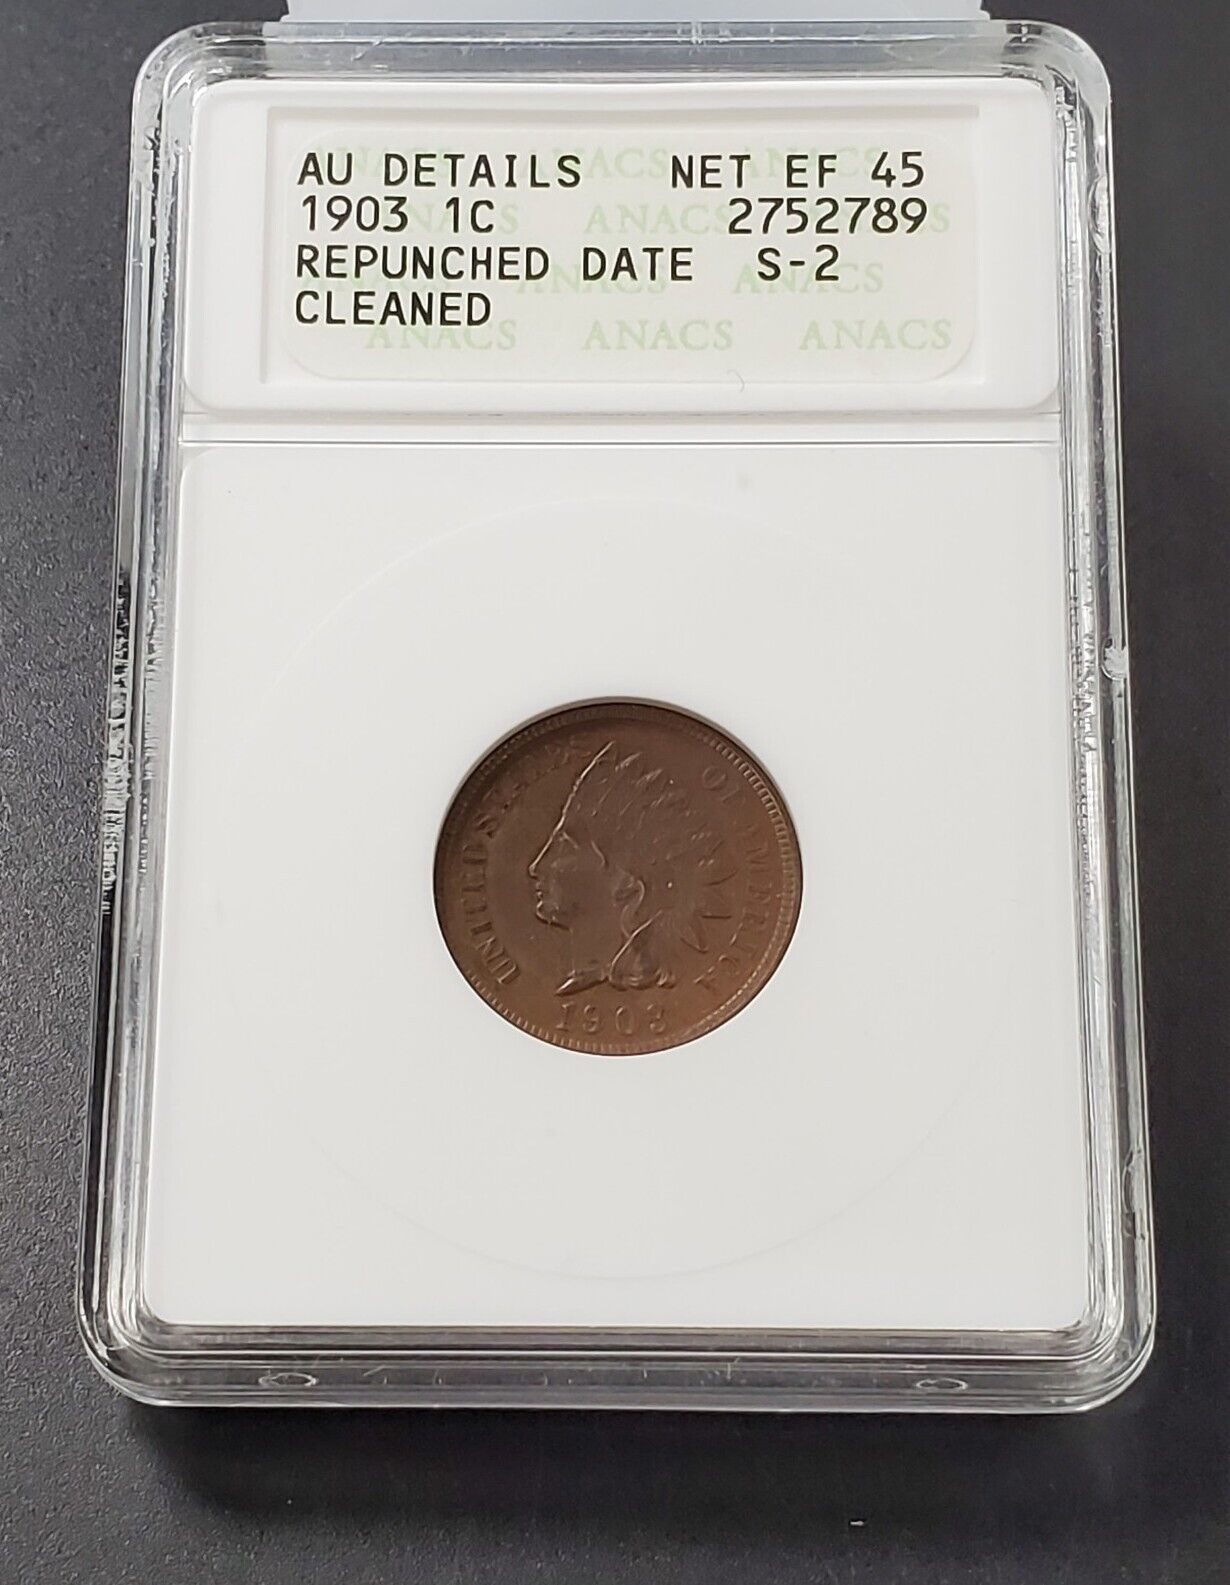 1903 Indian Head Cent Variety Error Coin ANACS EF45  Repunched Date S-2 Cleaned